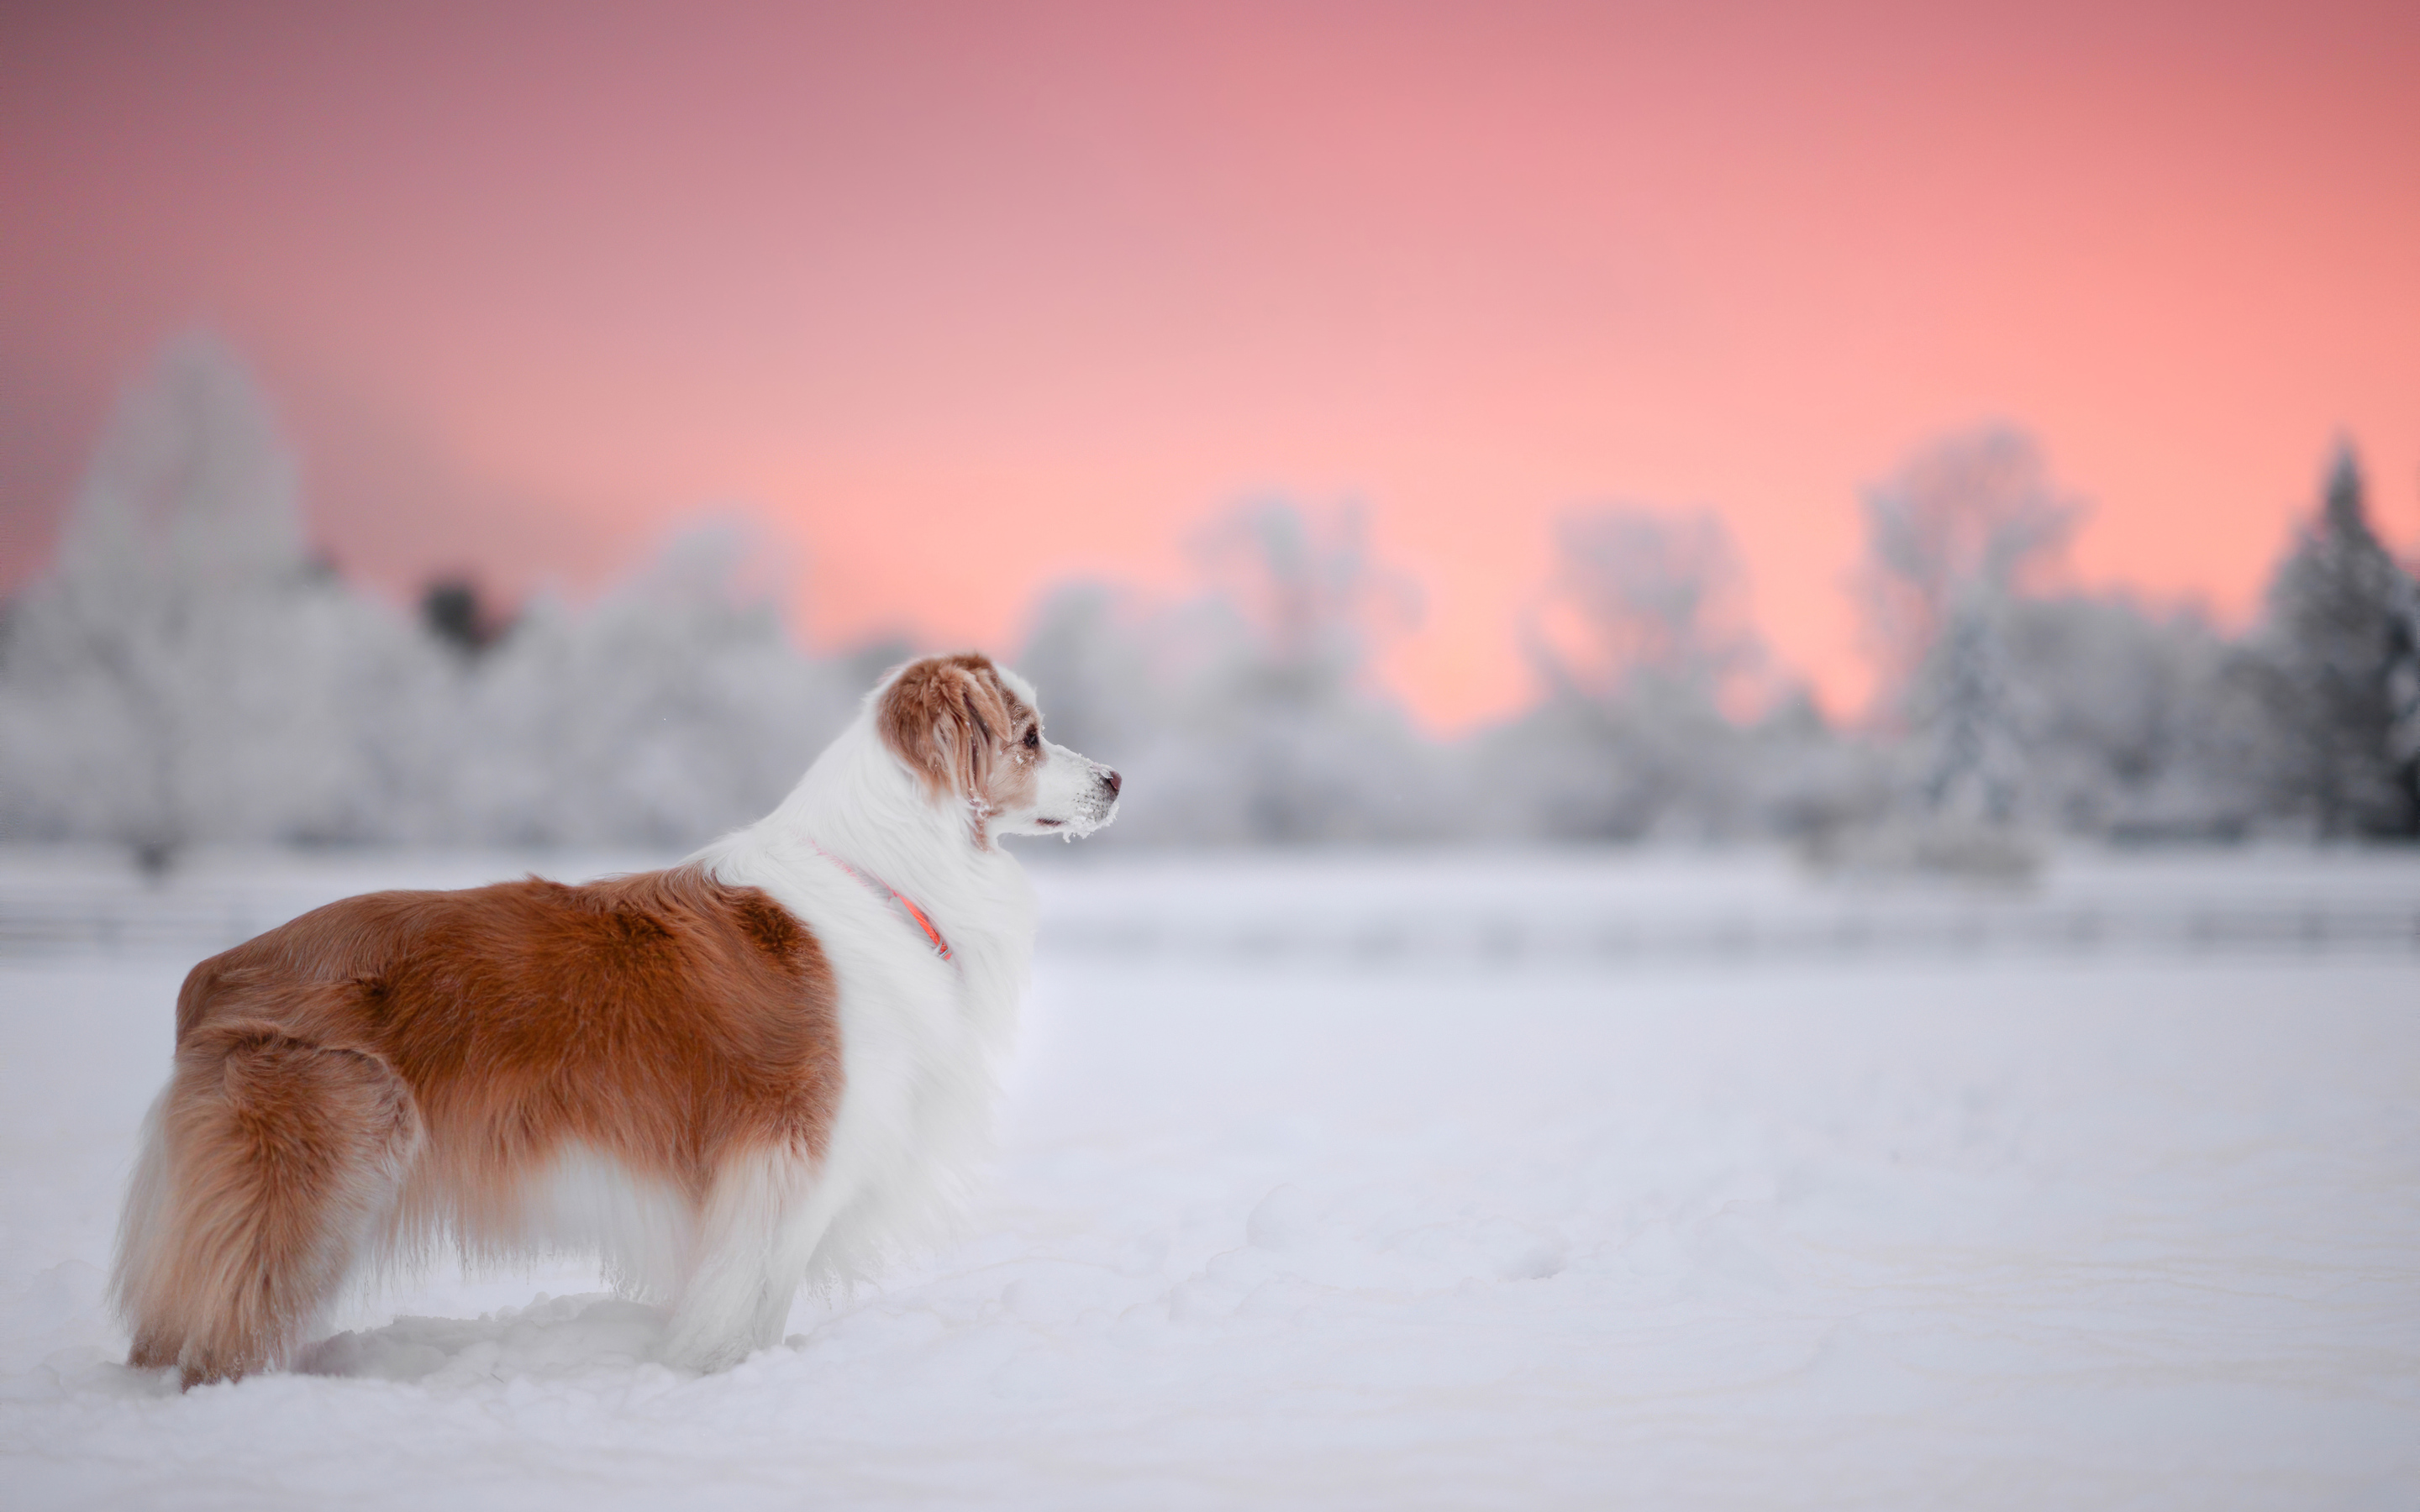 Dog Snow 4k Macbook Pro Retina HD 4k Wallpaper, Image, Background, Photo and Picture